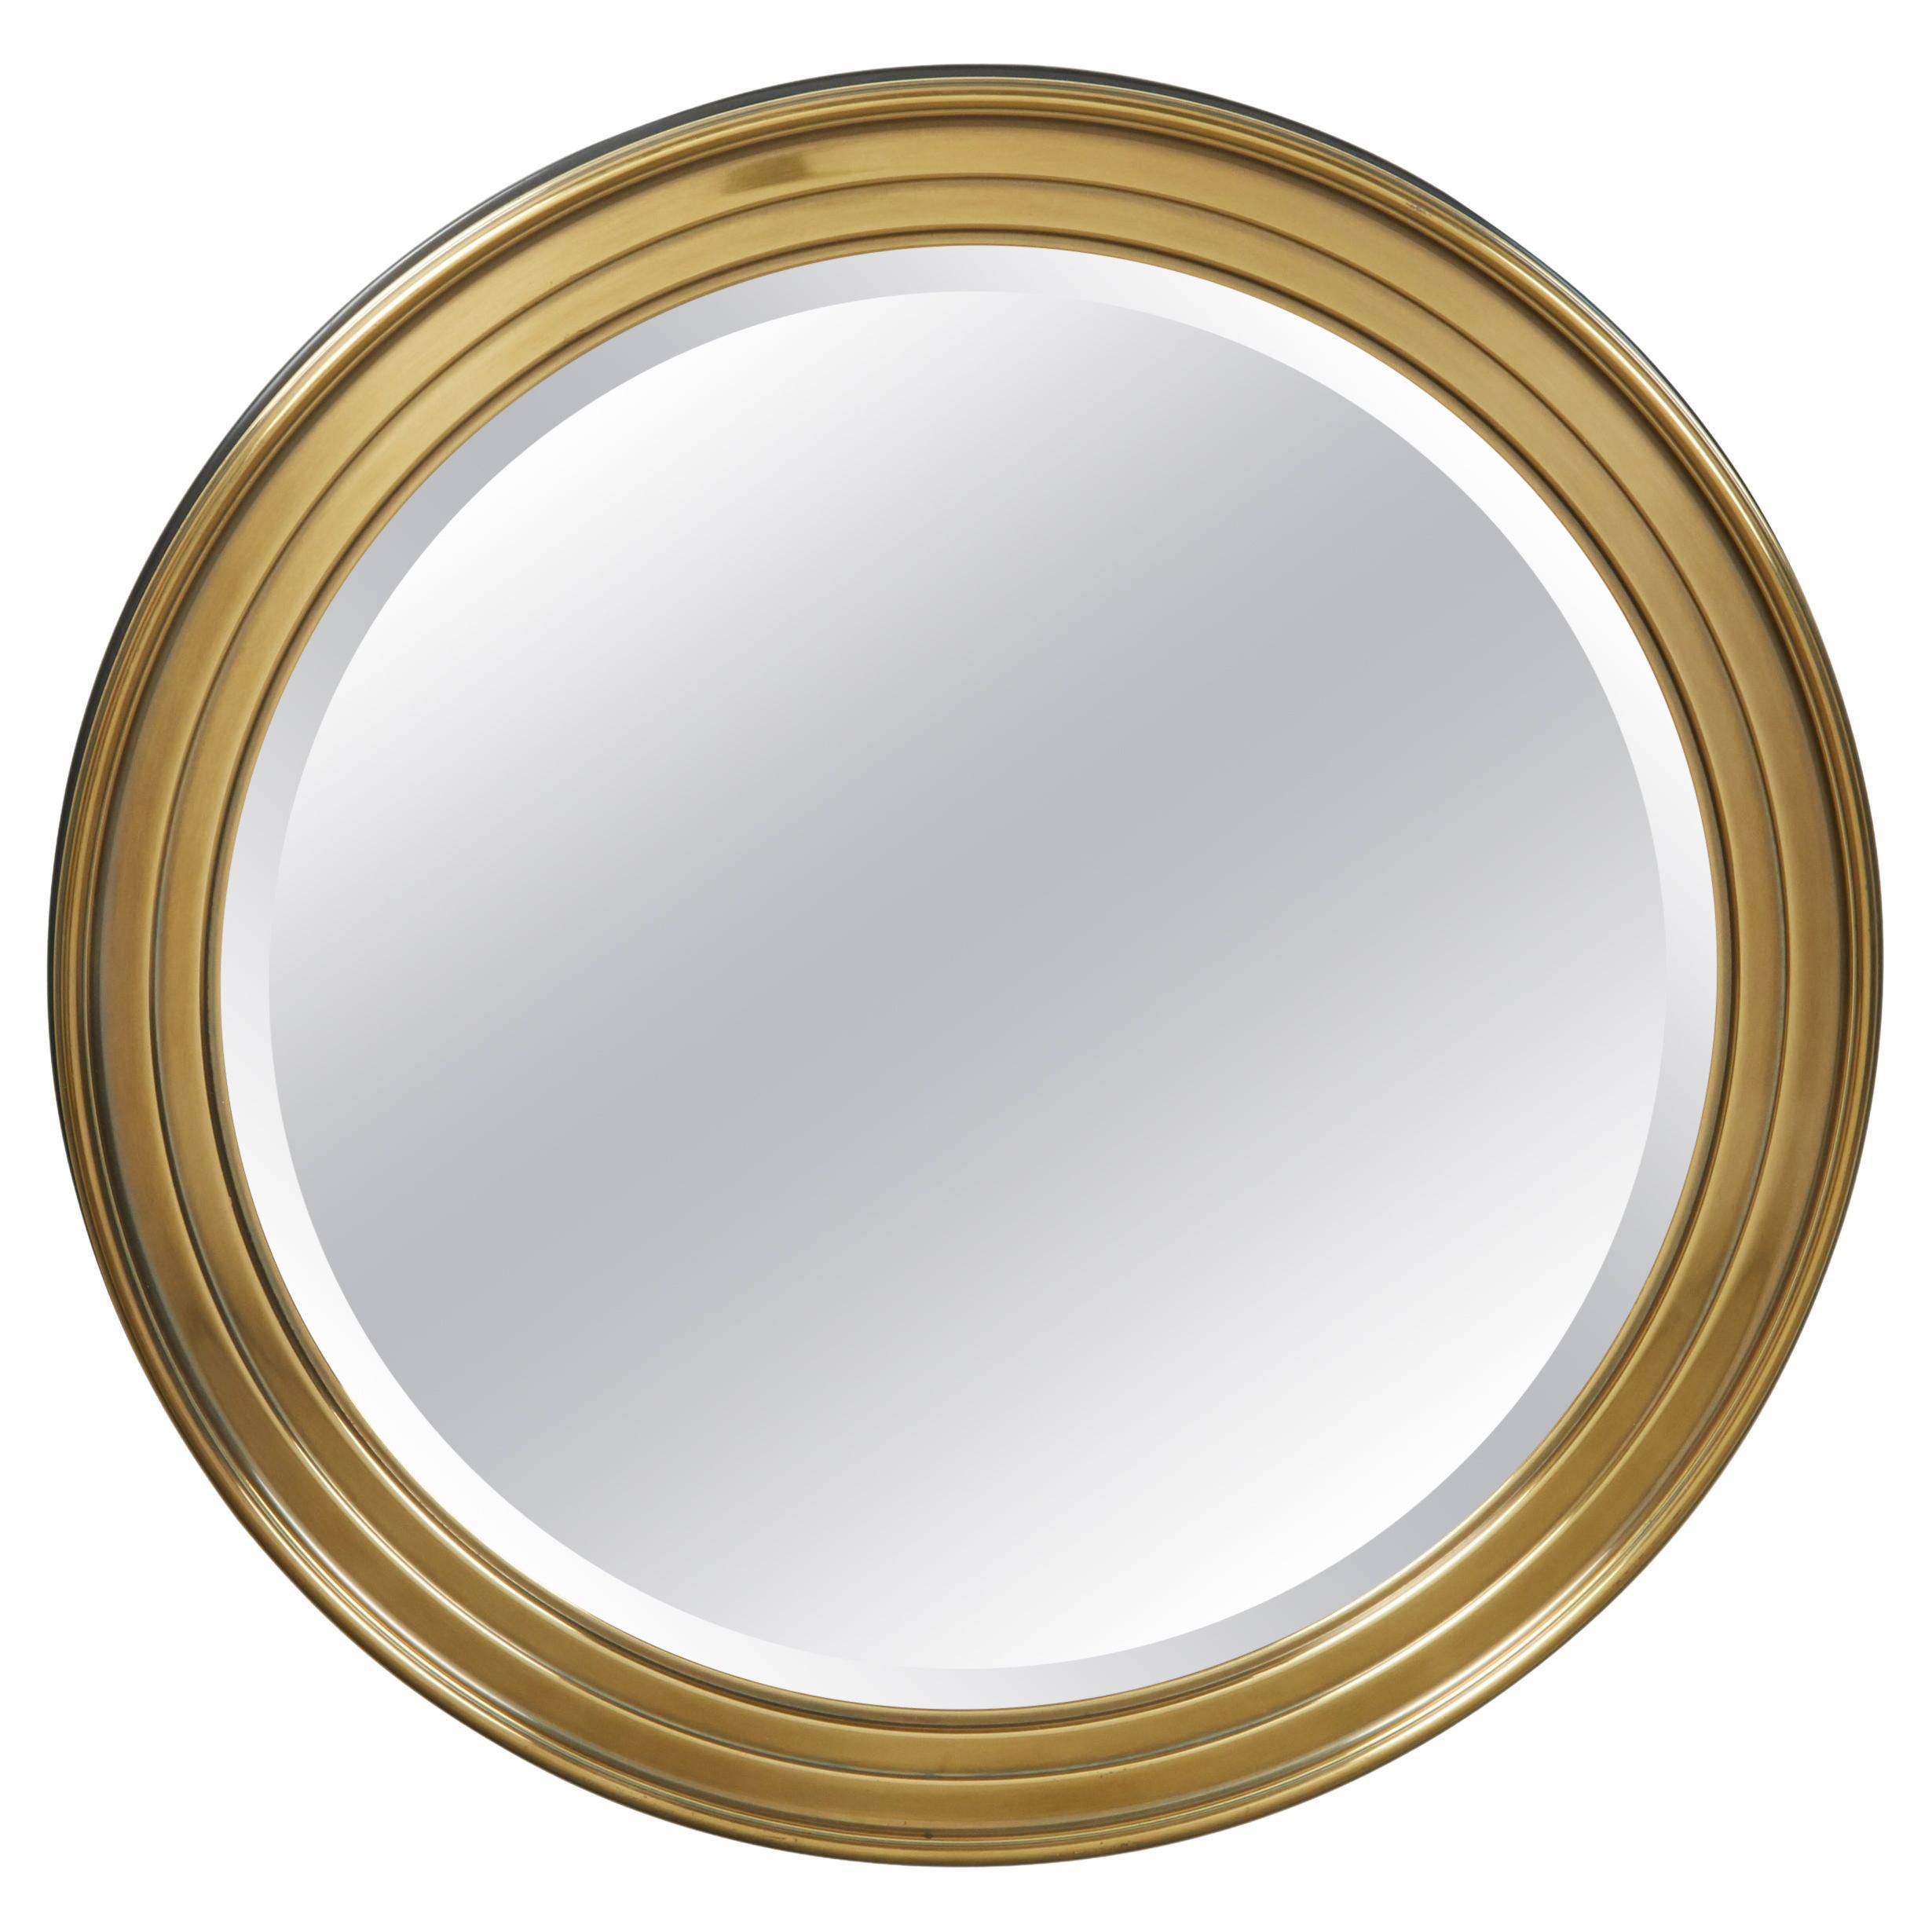 Midcentury Brass Circular Mirror with Stepped Frame and Beveled Edge